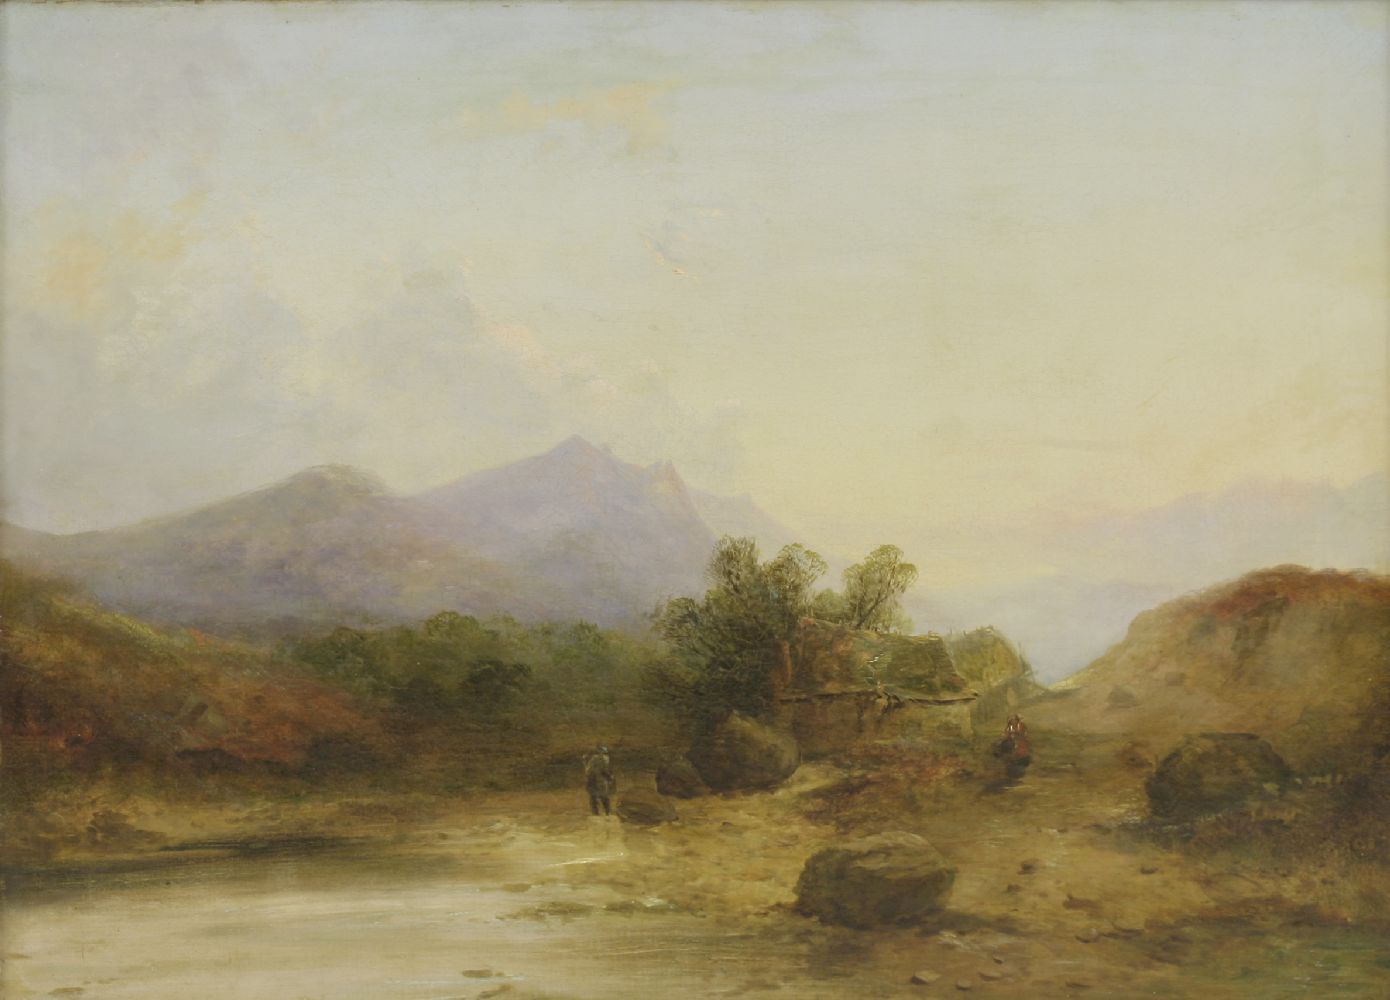 Circle of Joseph Horlor (1809-1887)FIGURES BY A POOL IN A MOUNTAINOUS LANDSCAPEOil on canvas56 x